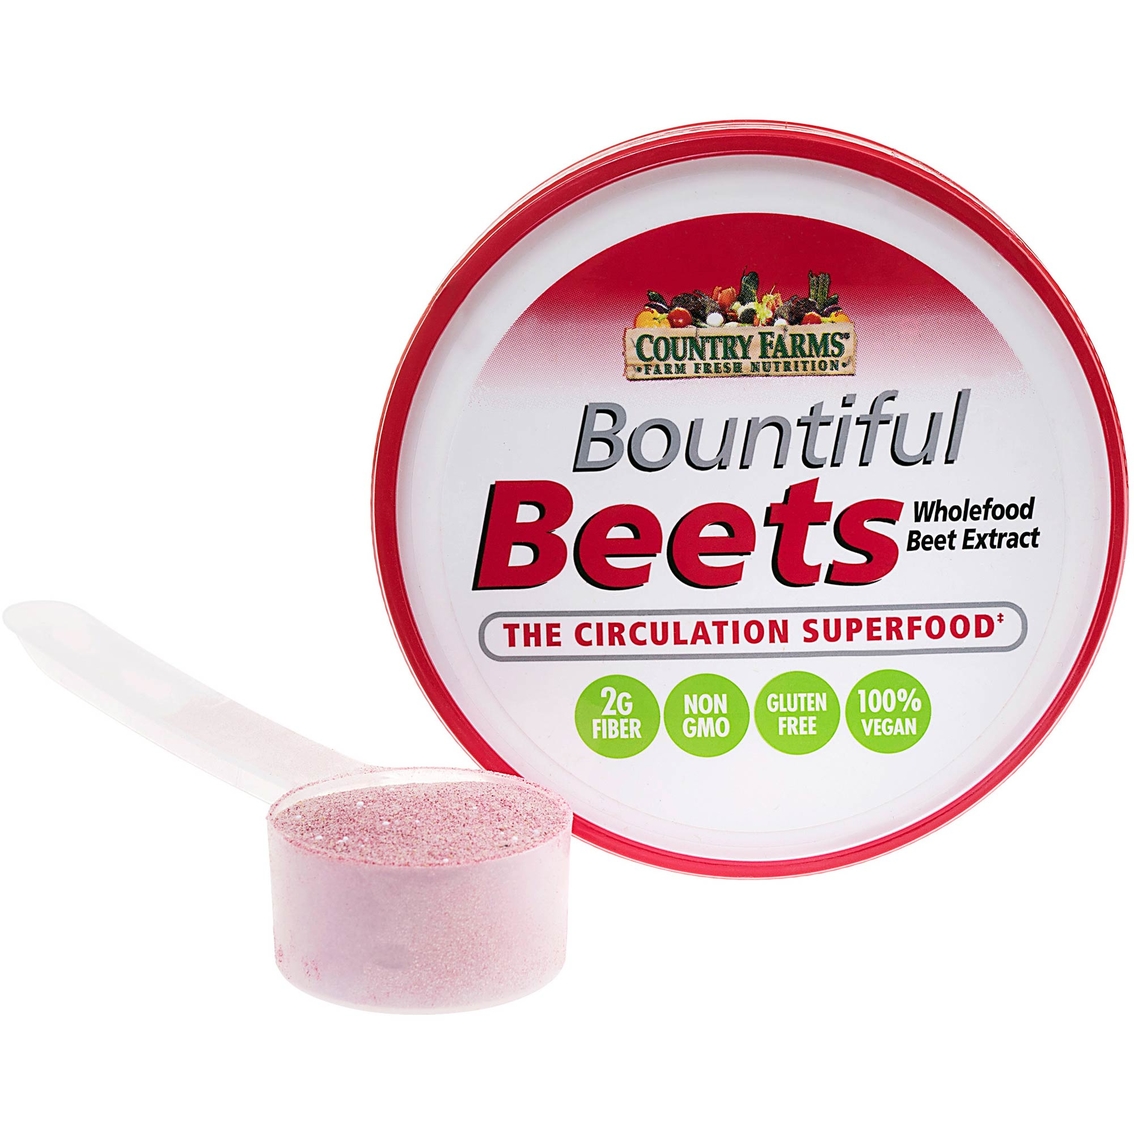 Country Farms Bountiful Beets 10.6 oz. - Image 4 of 7